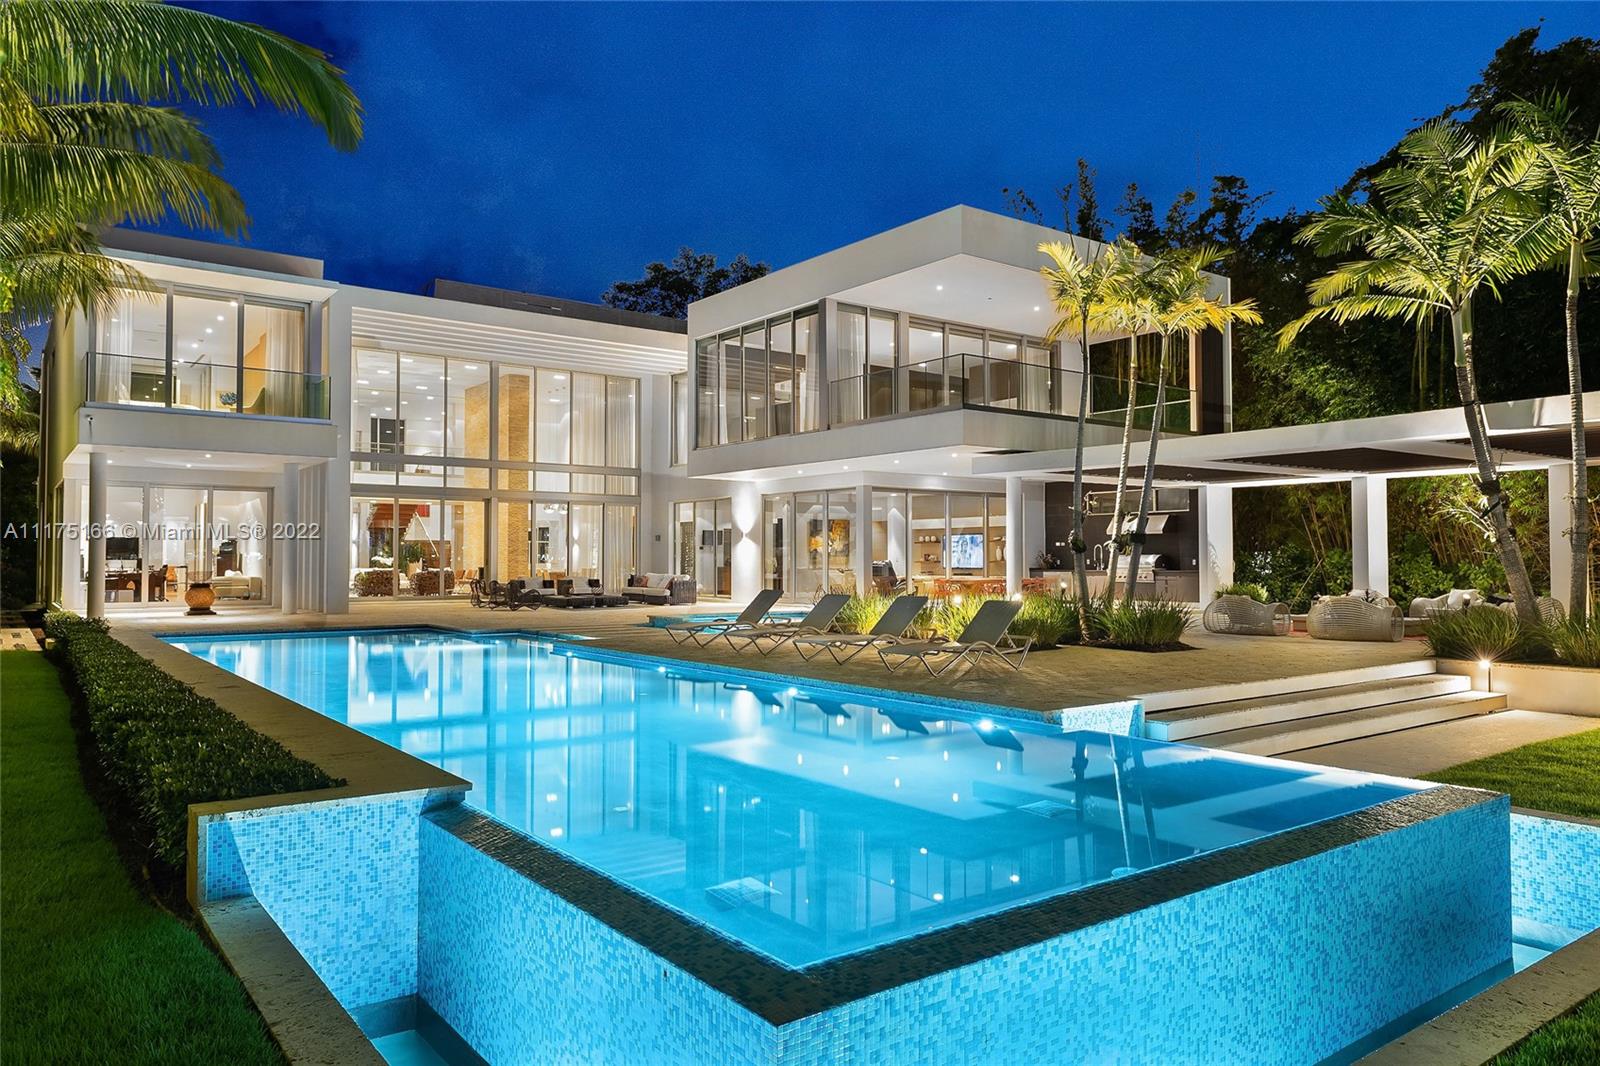 This modern 2-story estate on guard-gated Palm Island was magnificently redesigned and sits on a manicured 32,000 SF lot w/100' of waterfront & 13,144 total SF. The home features 9BR/8+1BA, soaring ceilings, rich hardwood floors & expansive living, dining & family areas all with stunning water and city views. A gourmet kitchen sports top-of-the line appliances, a family room, a movie theater, elevator, pet room, 4-car garage, staff rooms, recreation room and a full gym. The 2nd floor principal suite is spacious w/views to the pool, dual walk-in closets and beautiful Carrara marble bathroom. Outdoor features include a large pool w/Jacuzzi, covered seating area with summer kitchen, an IPE wood dock & direct access to Biscayne Bay & the Ocean. Being sold furnished.